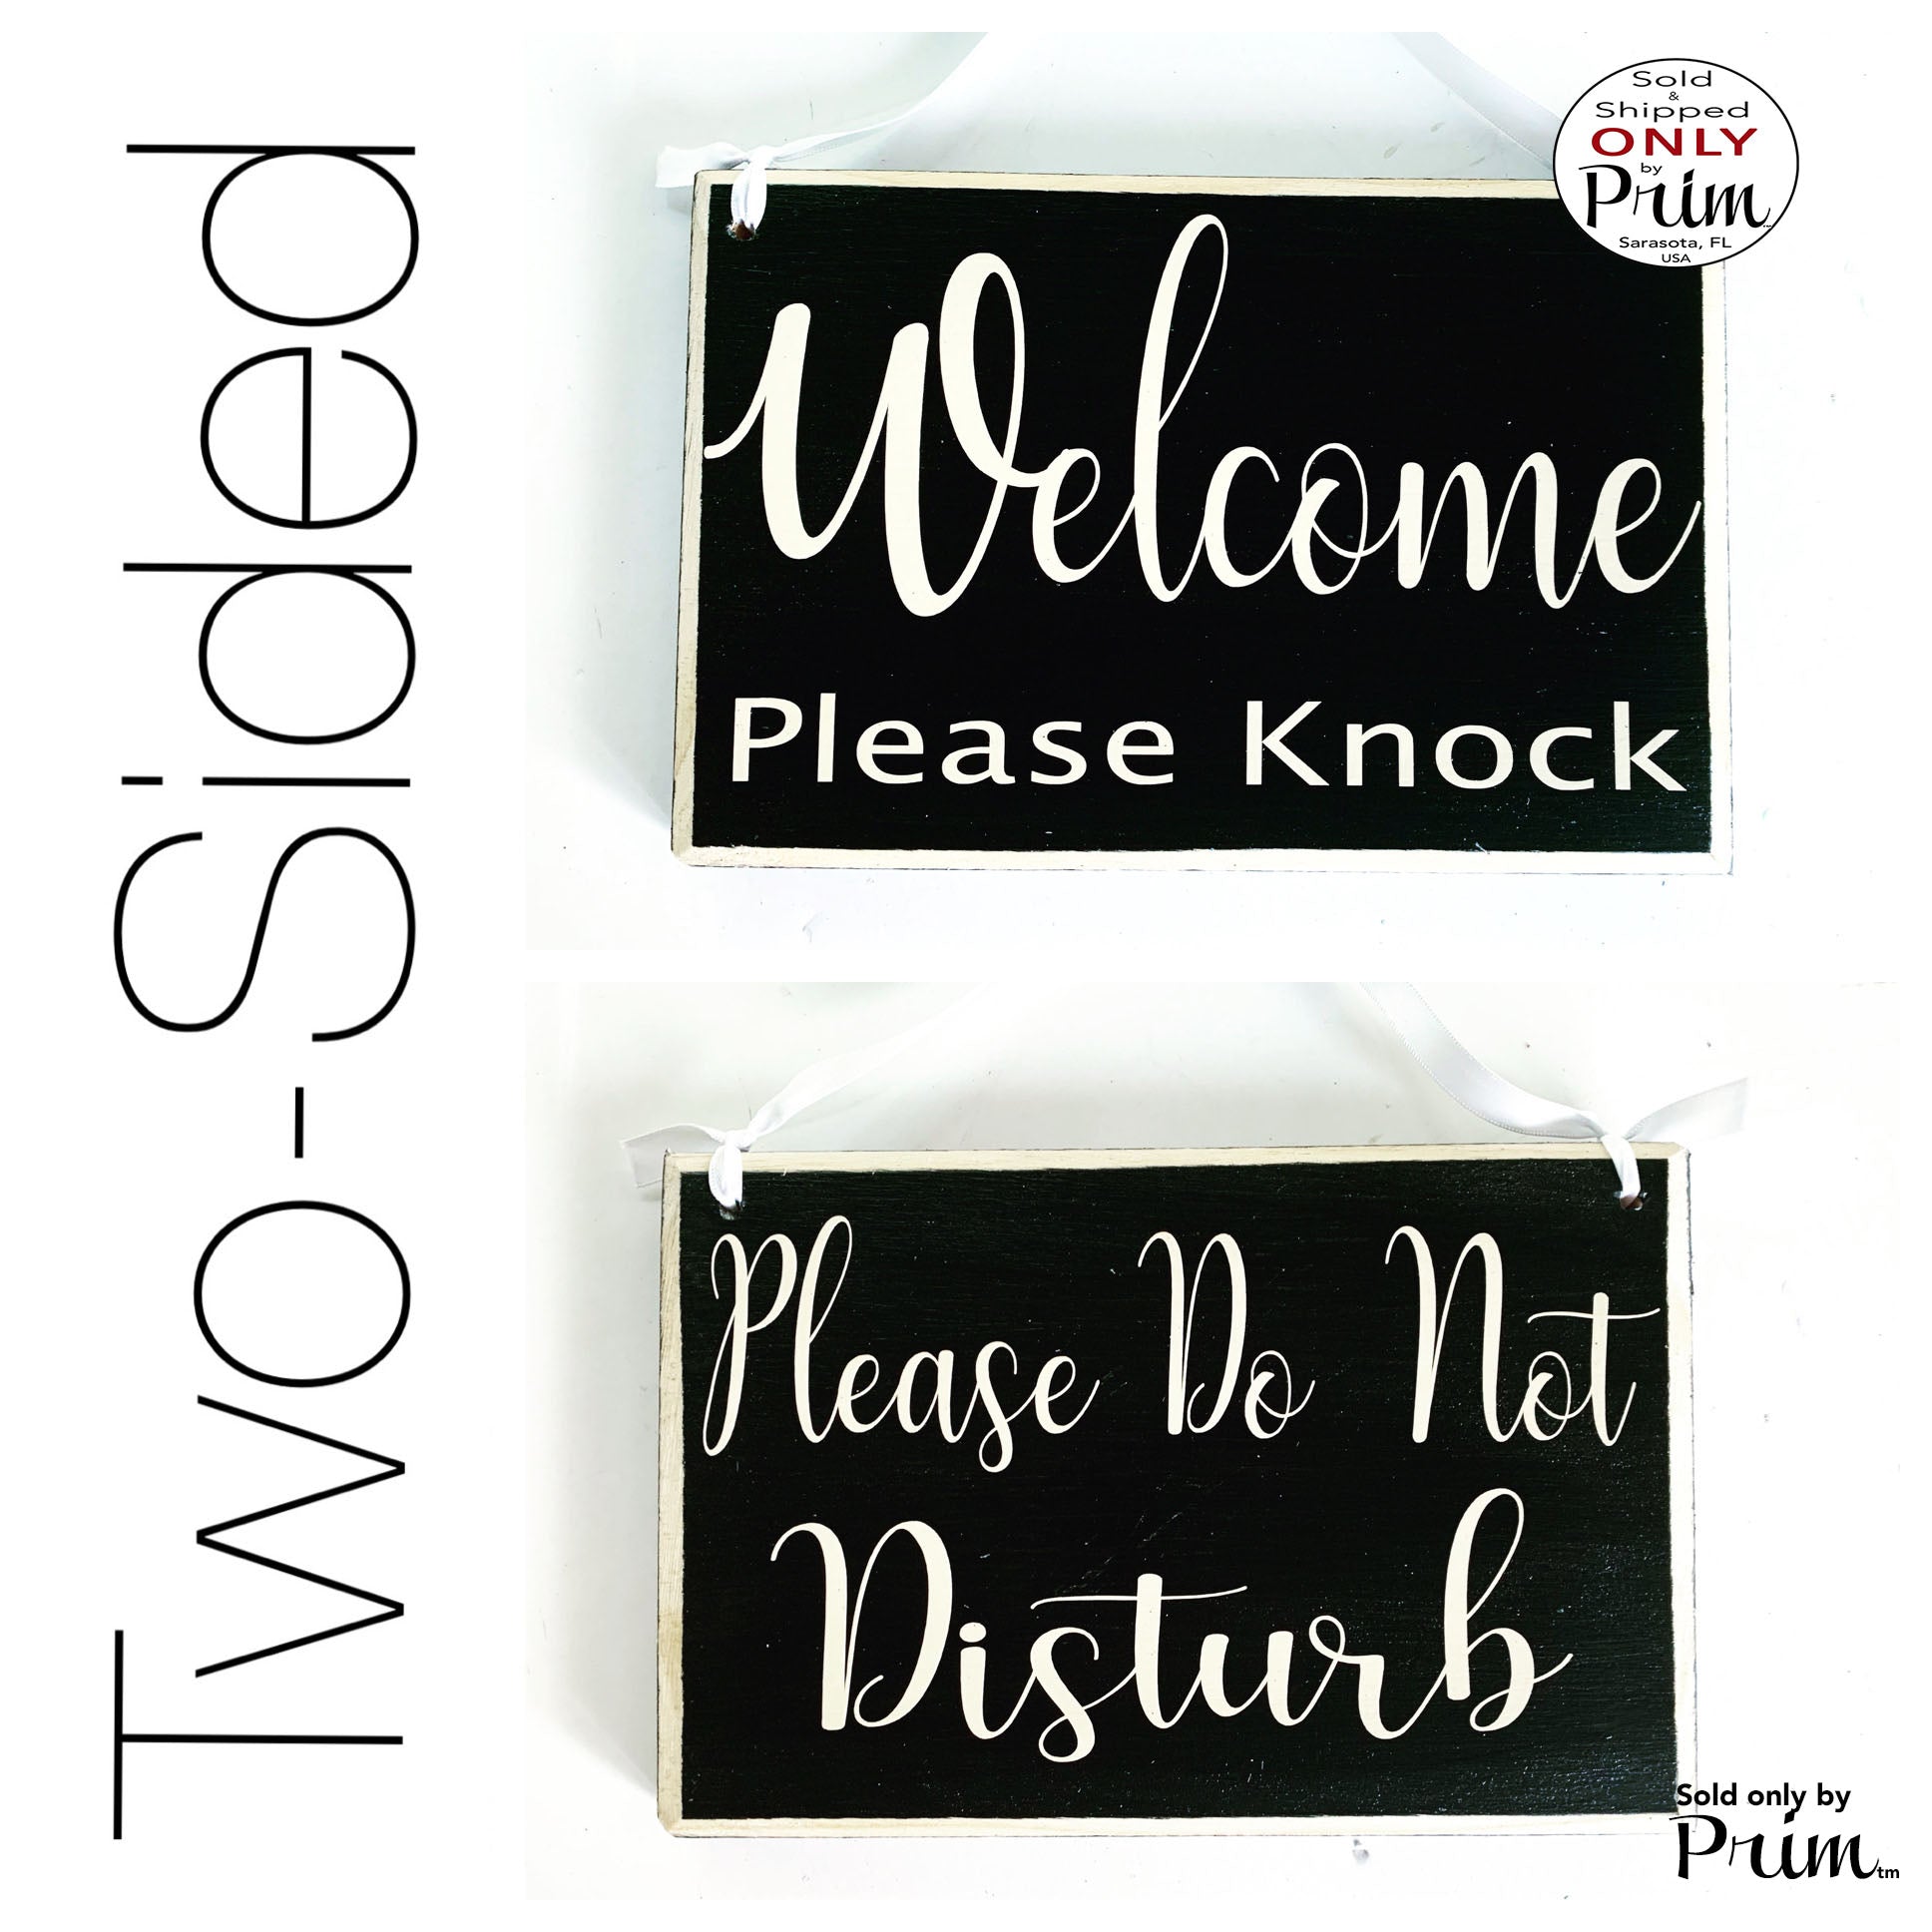 Two Sided 8x6 Welcome Please Knock Please Do Not Disturb Custom Wood Sign Unavailable Office Business Counselor Therapist Busy Door Hanger Designs by Prim